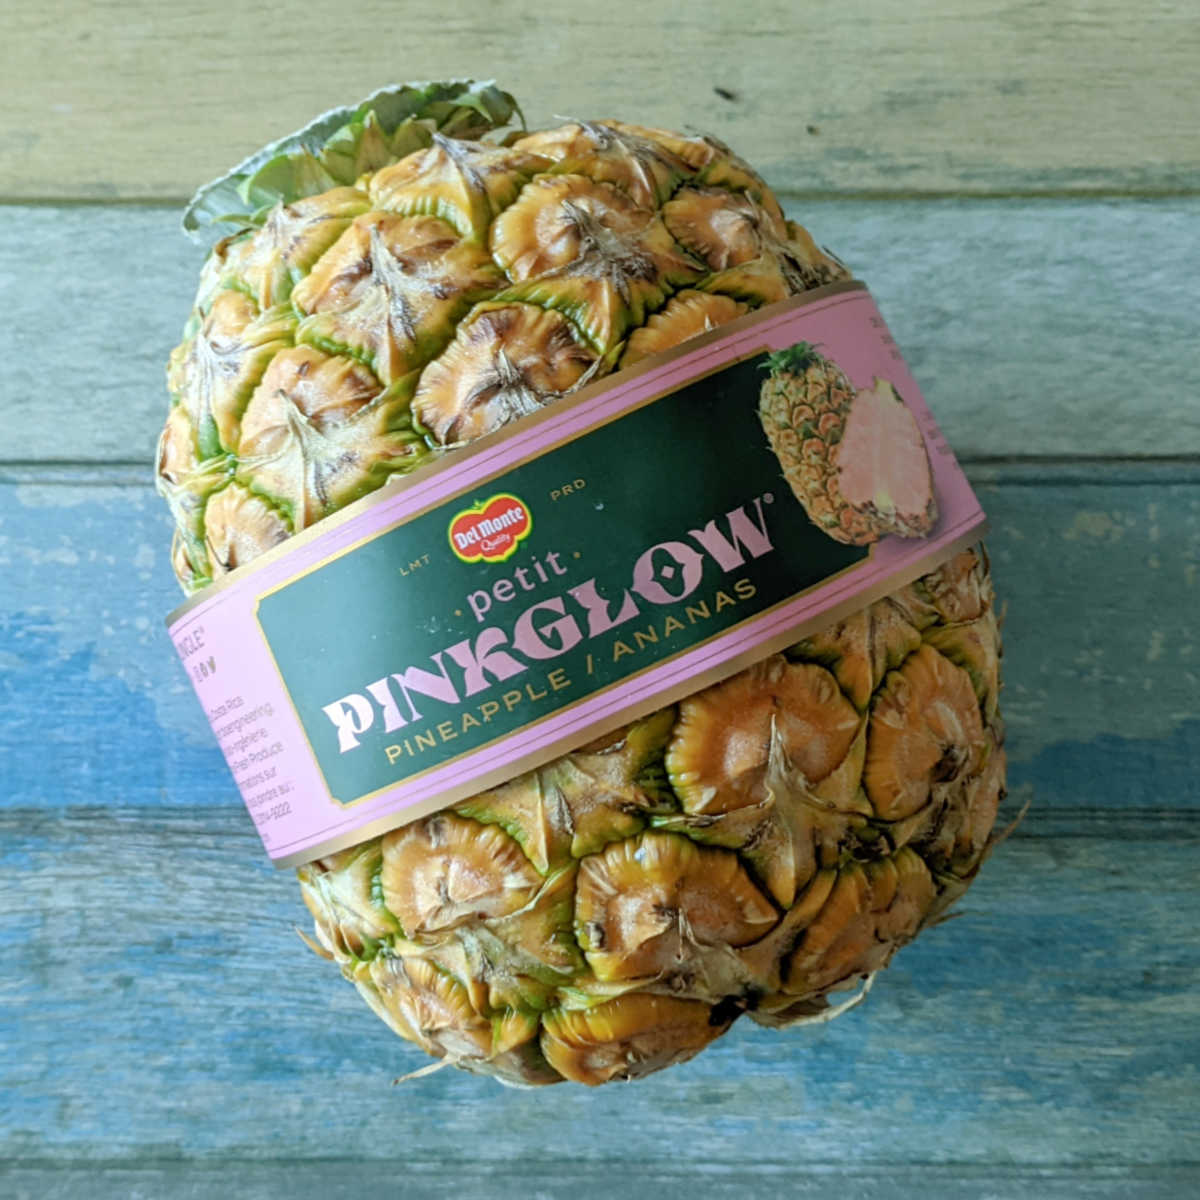 The Pinkglow Pineapple explodes with unique flavor and a gorgeous pink hue. Discover this tropical treasure that is available year-round and will quickly become a family favorite.